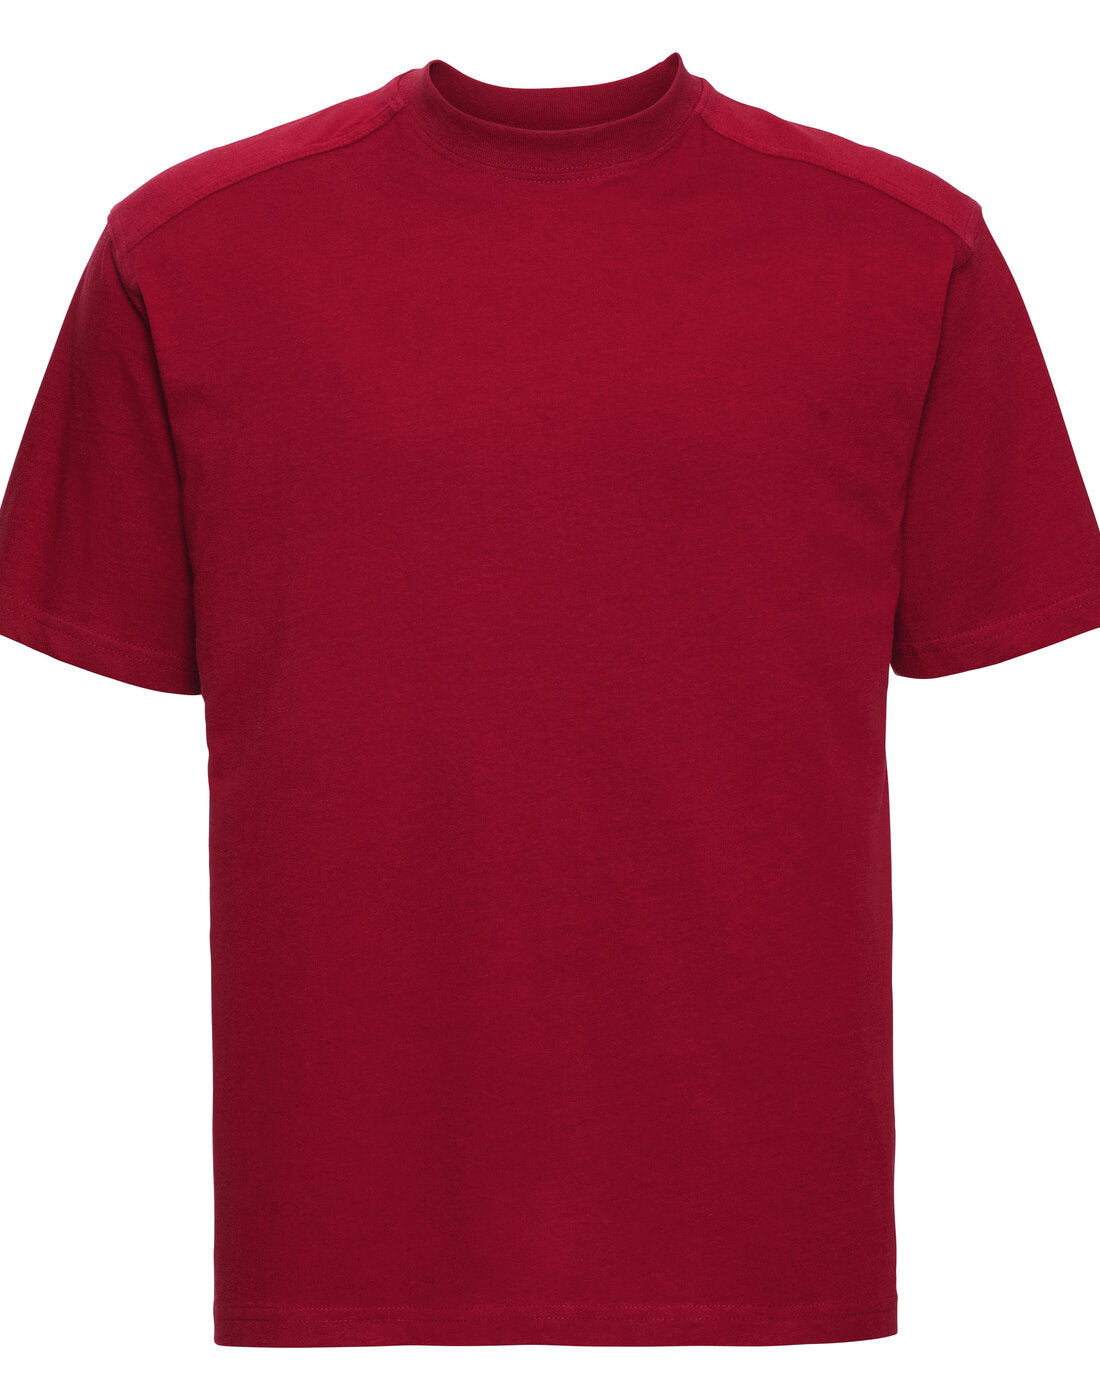 Russell Heavy Duty Workwear T-Shirt - Classic Red